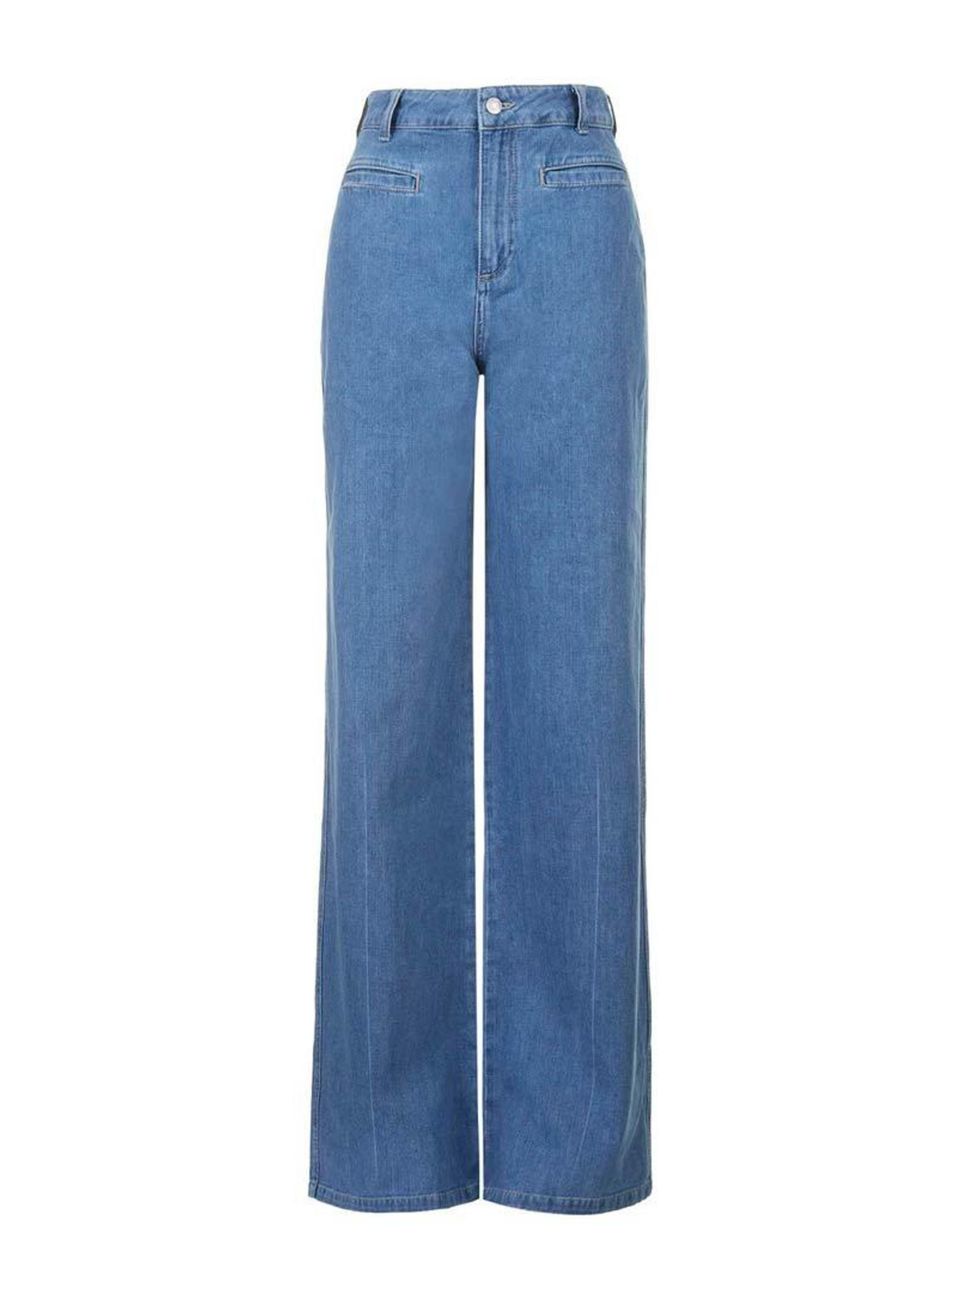 <p><a href="http://www.topshop.com/en/tsuk/product/clothing-427/jeans-446/flared-jeans-4243137/moto-miller-flared-jeans-4233839?bi=1&ps=20" target="_blank">Topshop</a> jeans, £40</p>